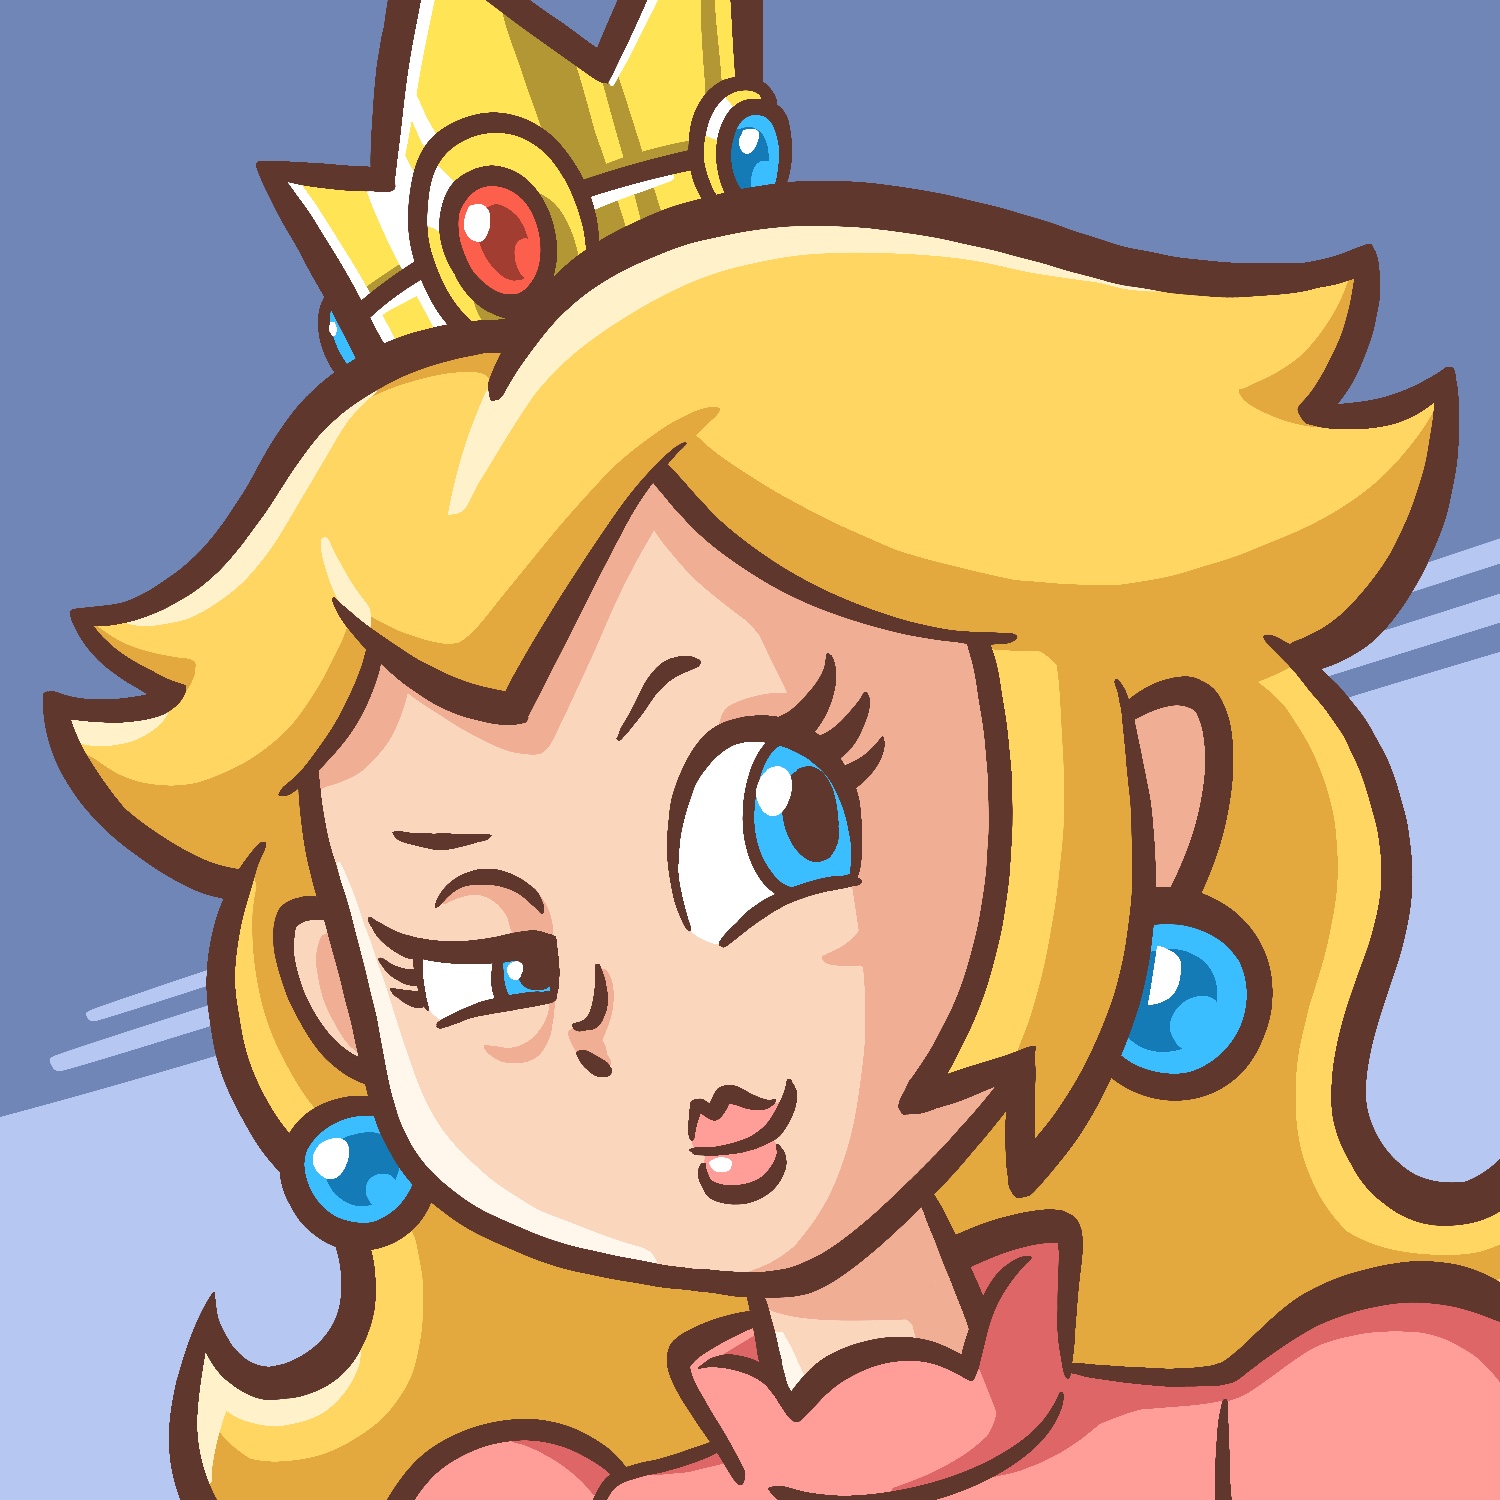 An illustration of Princess Peach from the Super Mario Bros. universe. She is drawn as a cartoon with the traditional light complexion, blond hair, blue eyes and earrings, and pink dress. A small, jeweled crown rests on the top of her head, and she is looking away to the right mischievously.